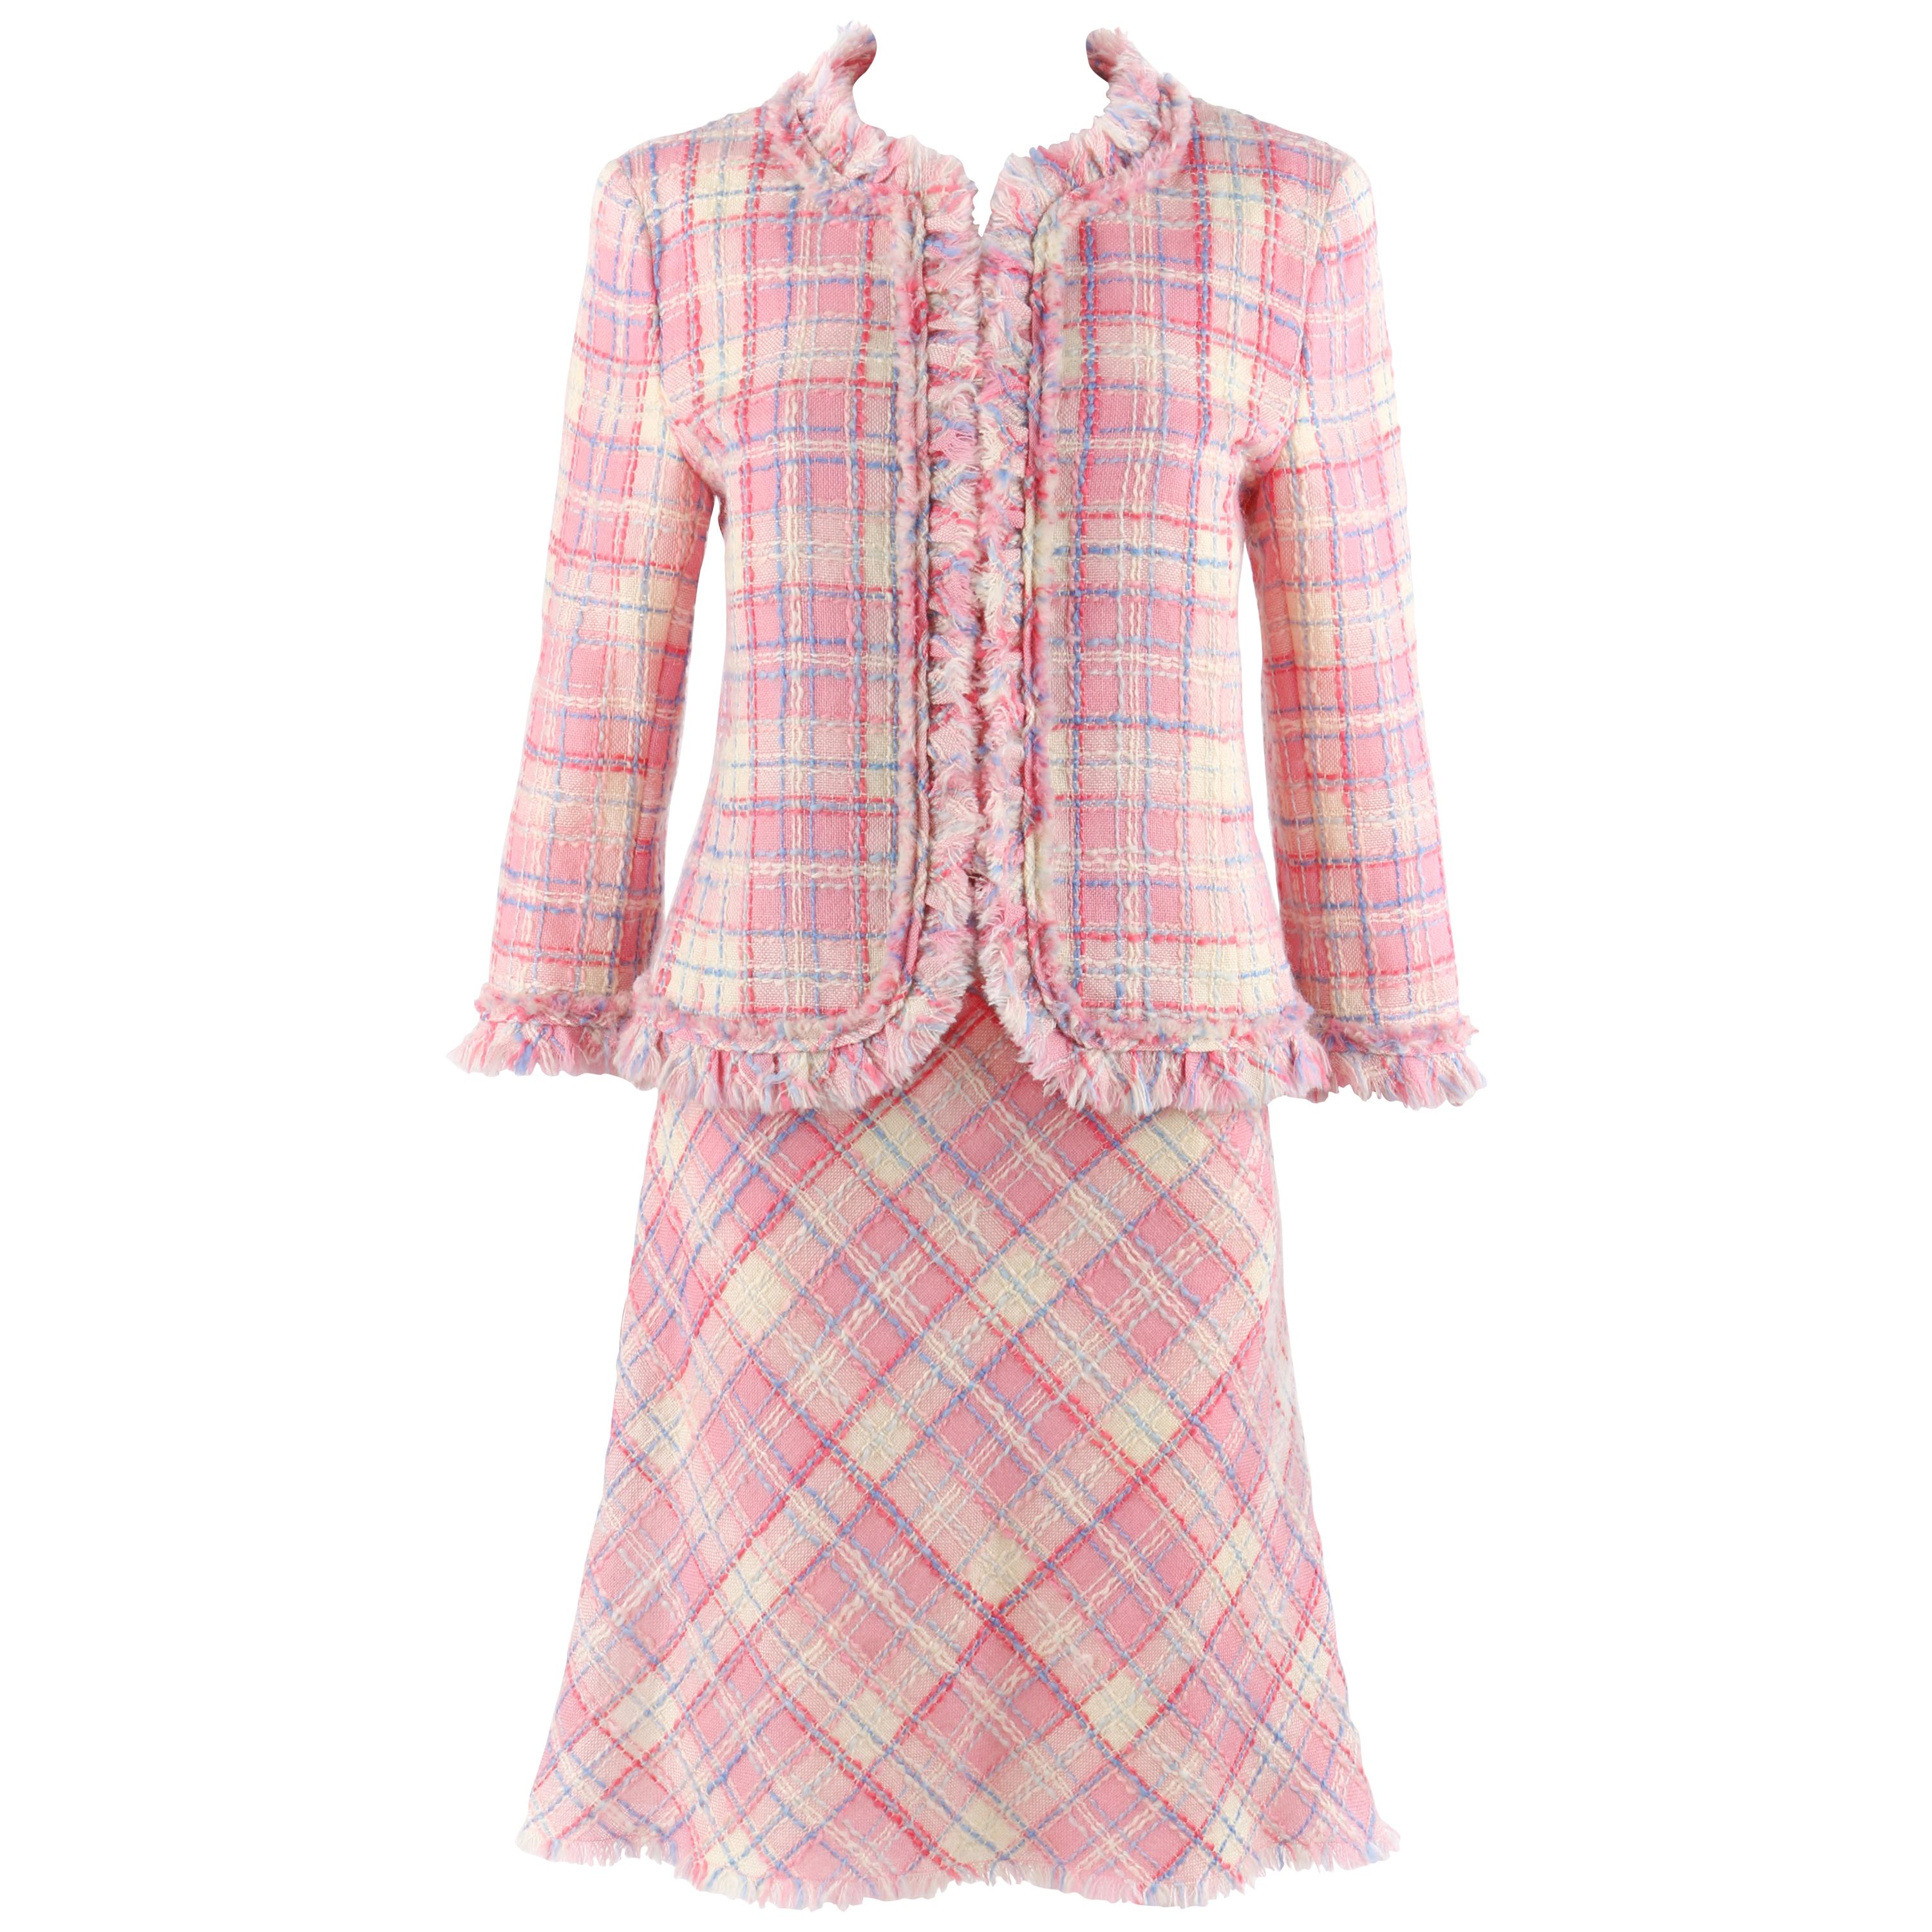 MOSCHINO Cheap & Chic 2pc Pink Plaid Tweed Fringed Jacket Skirt Suit Set 